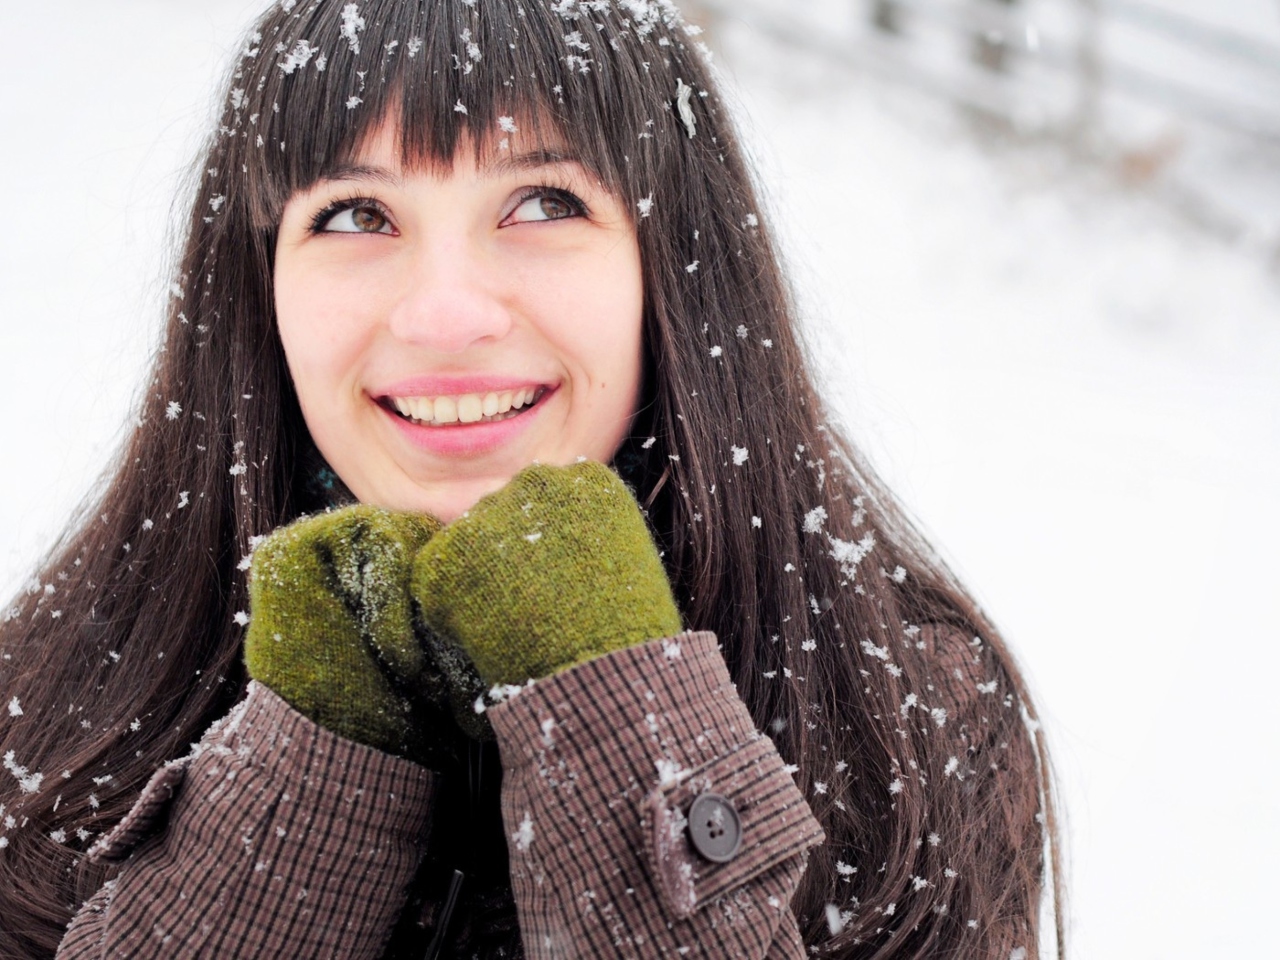 Brunette With Green Gloves In Snow wallpaper 1280x960